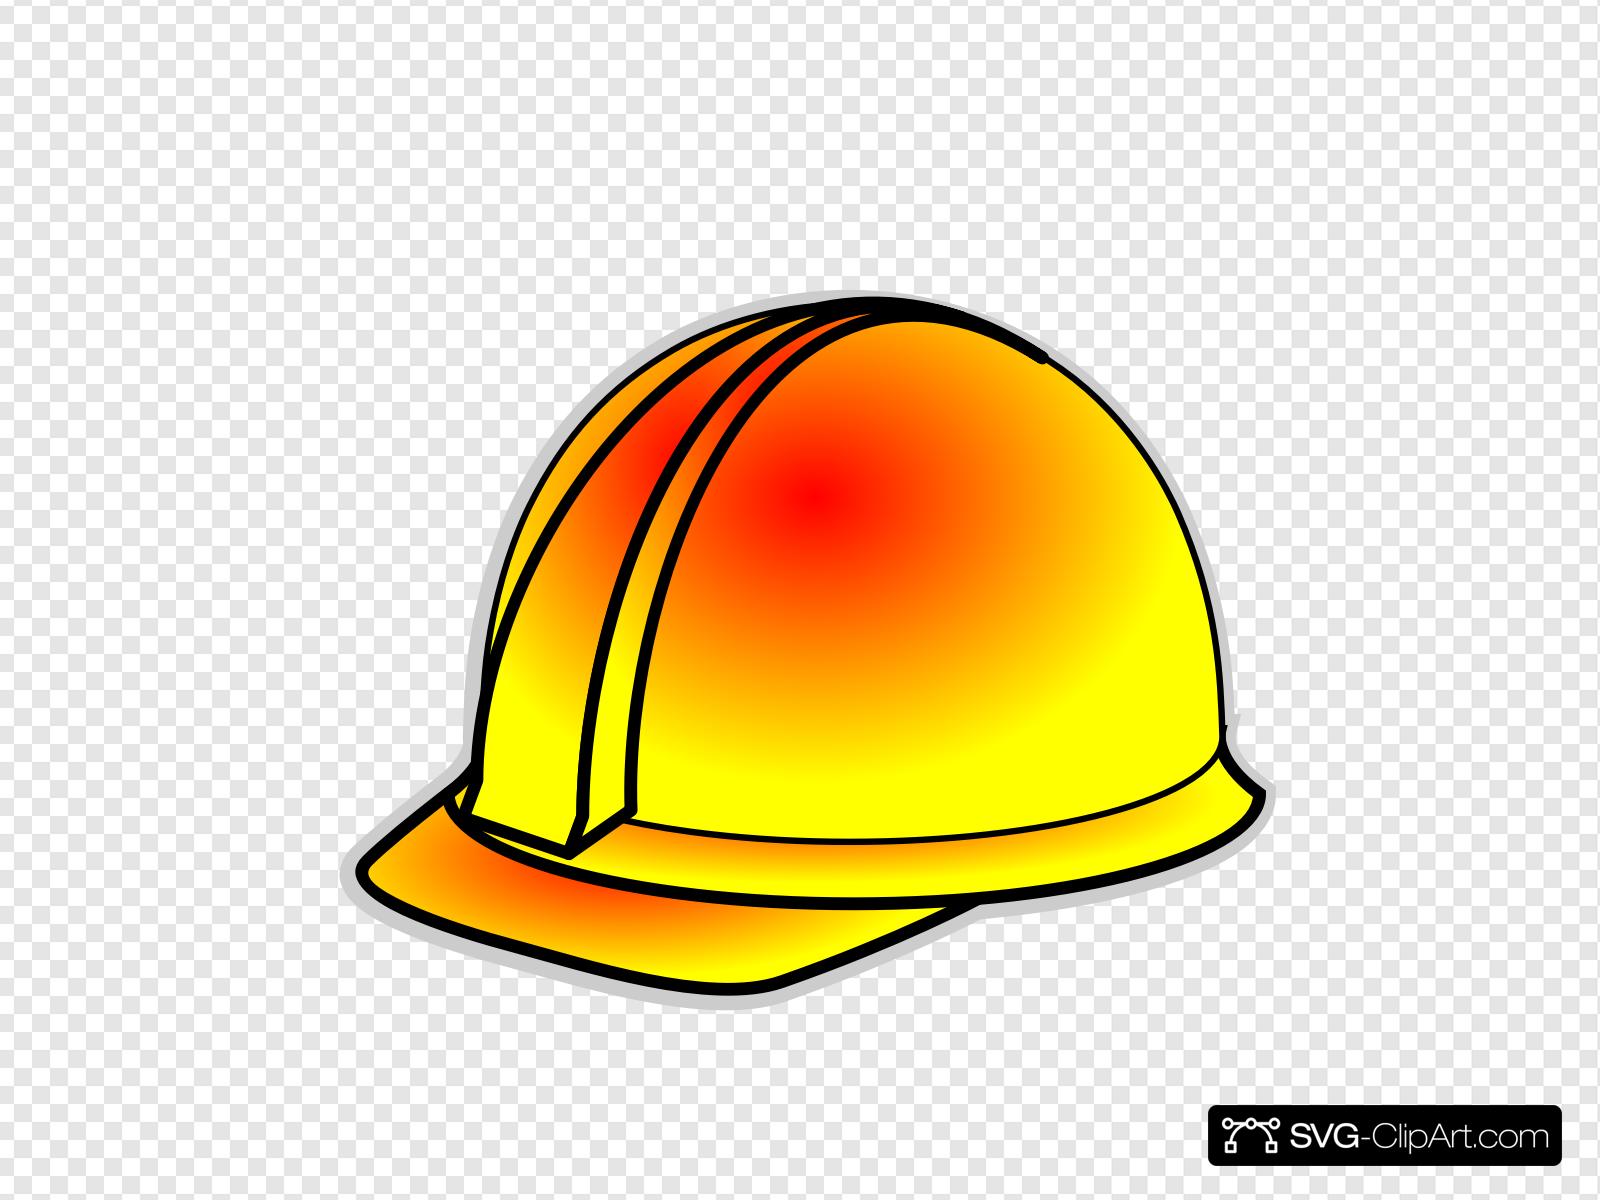 Yellow Hard Hat Clip art, Icon and SVG.